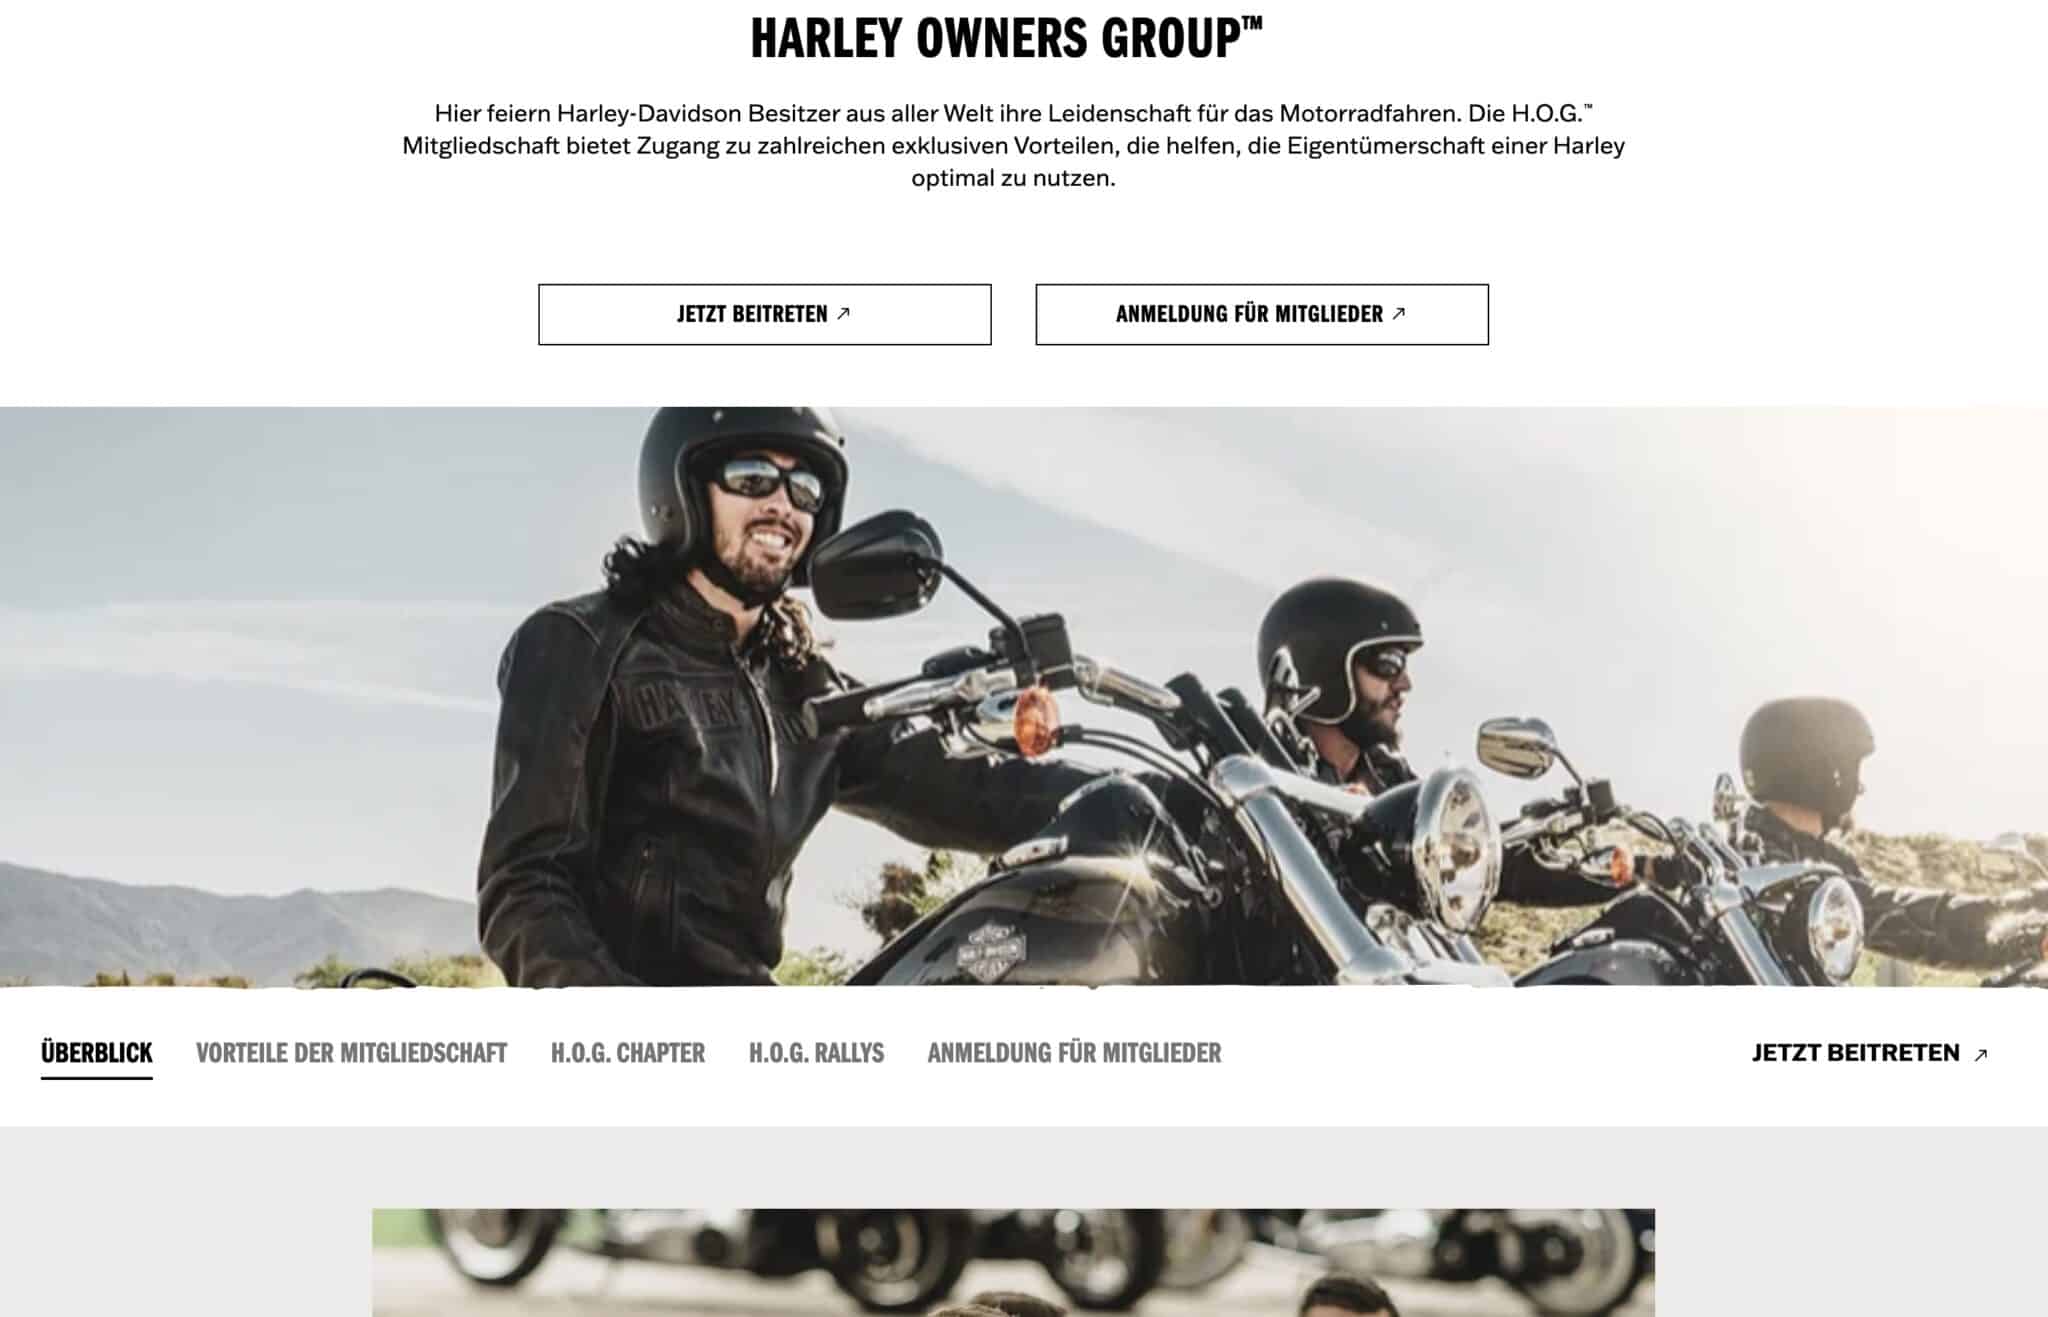 Harley Owners Group.